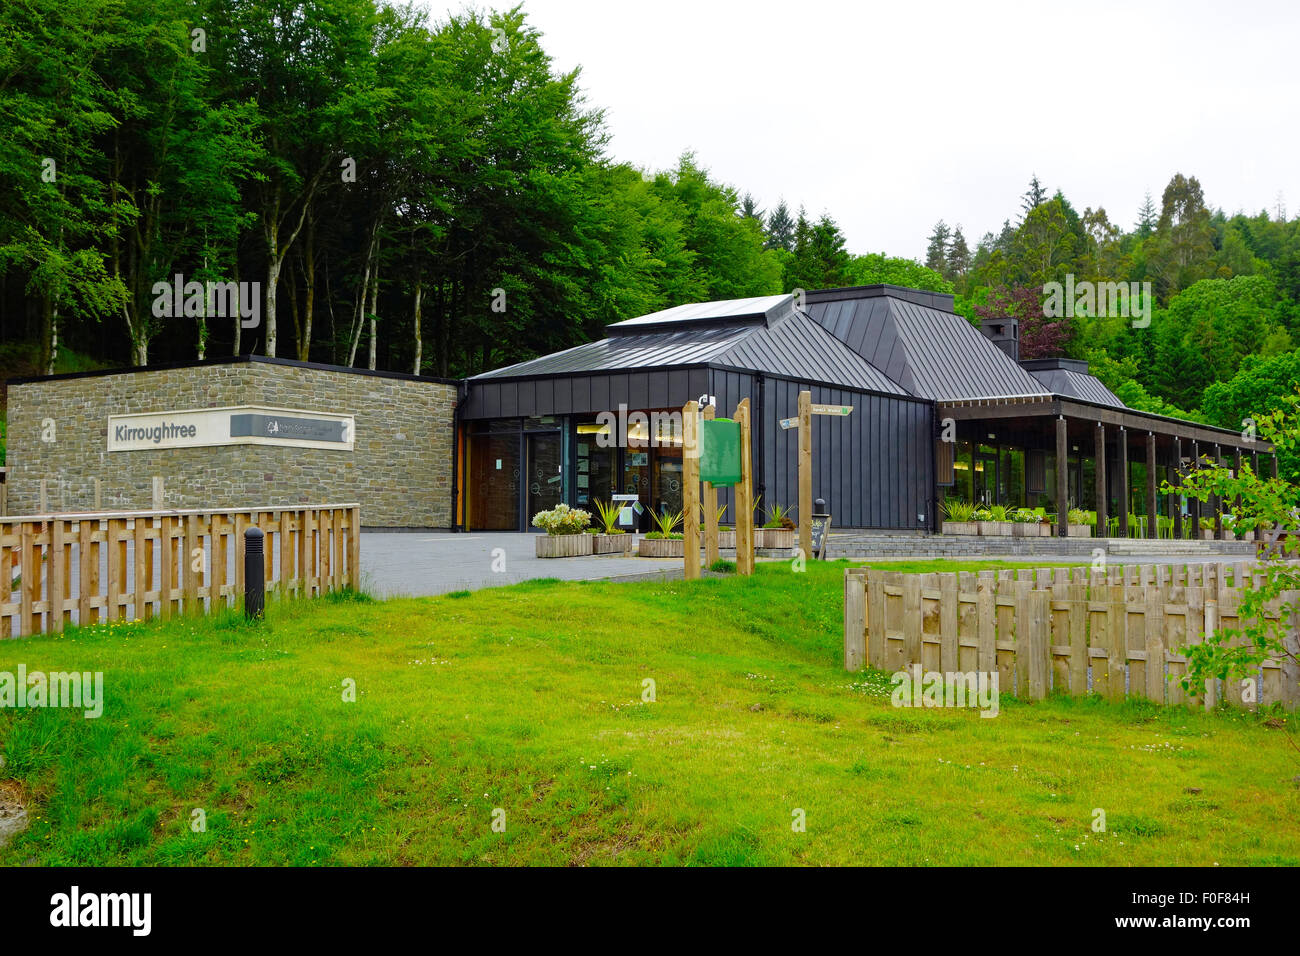 Forêt Kirroughtree Visitor Centre, Galloway Forest Park, Dumfries & Galloway, Scotland, UK Banque D'Images